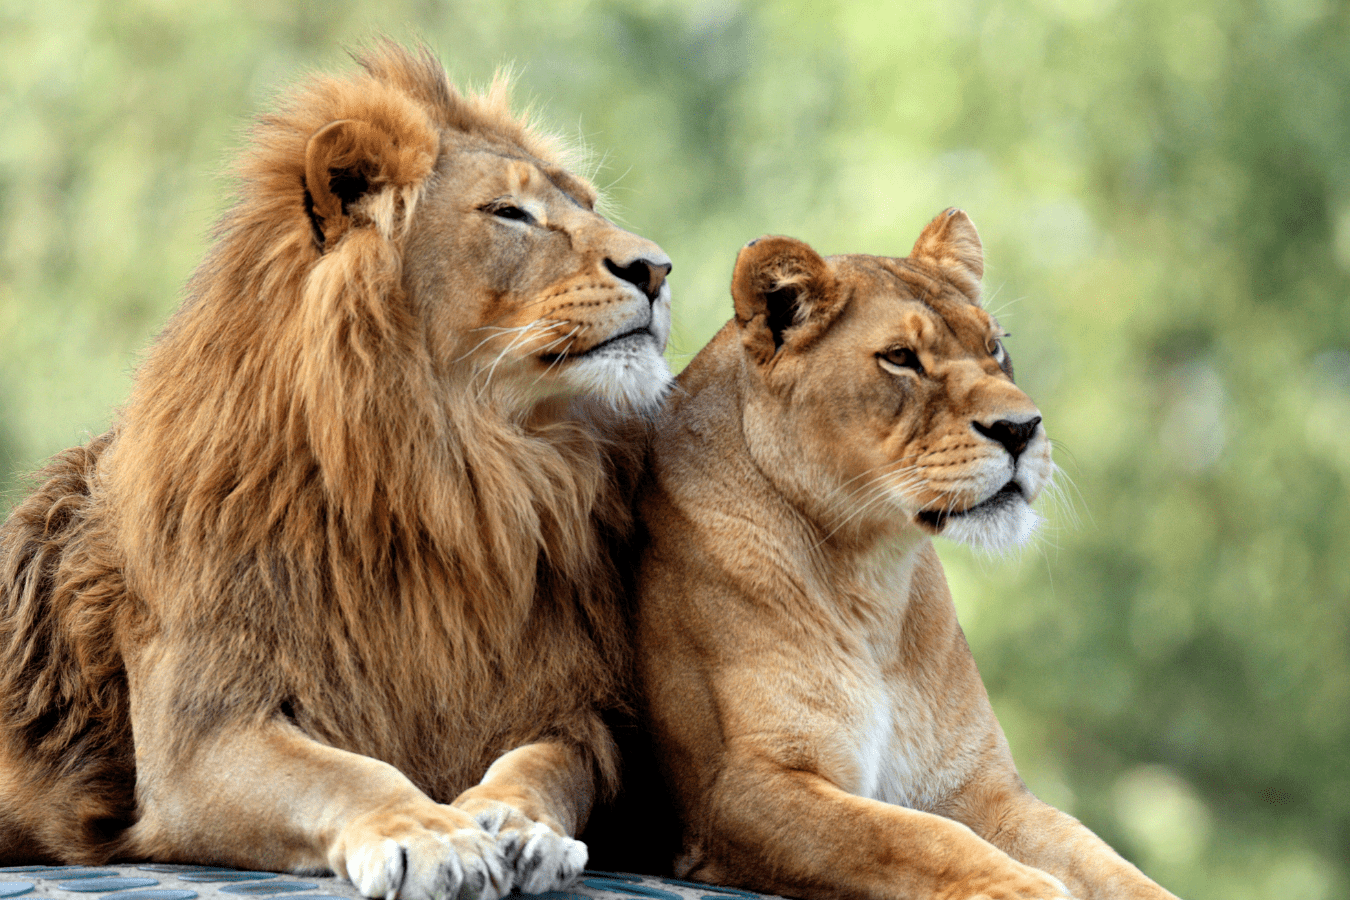 What Do Lions in Dreams Mean?